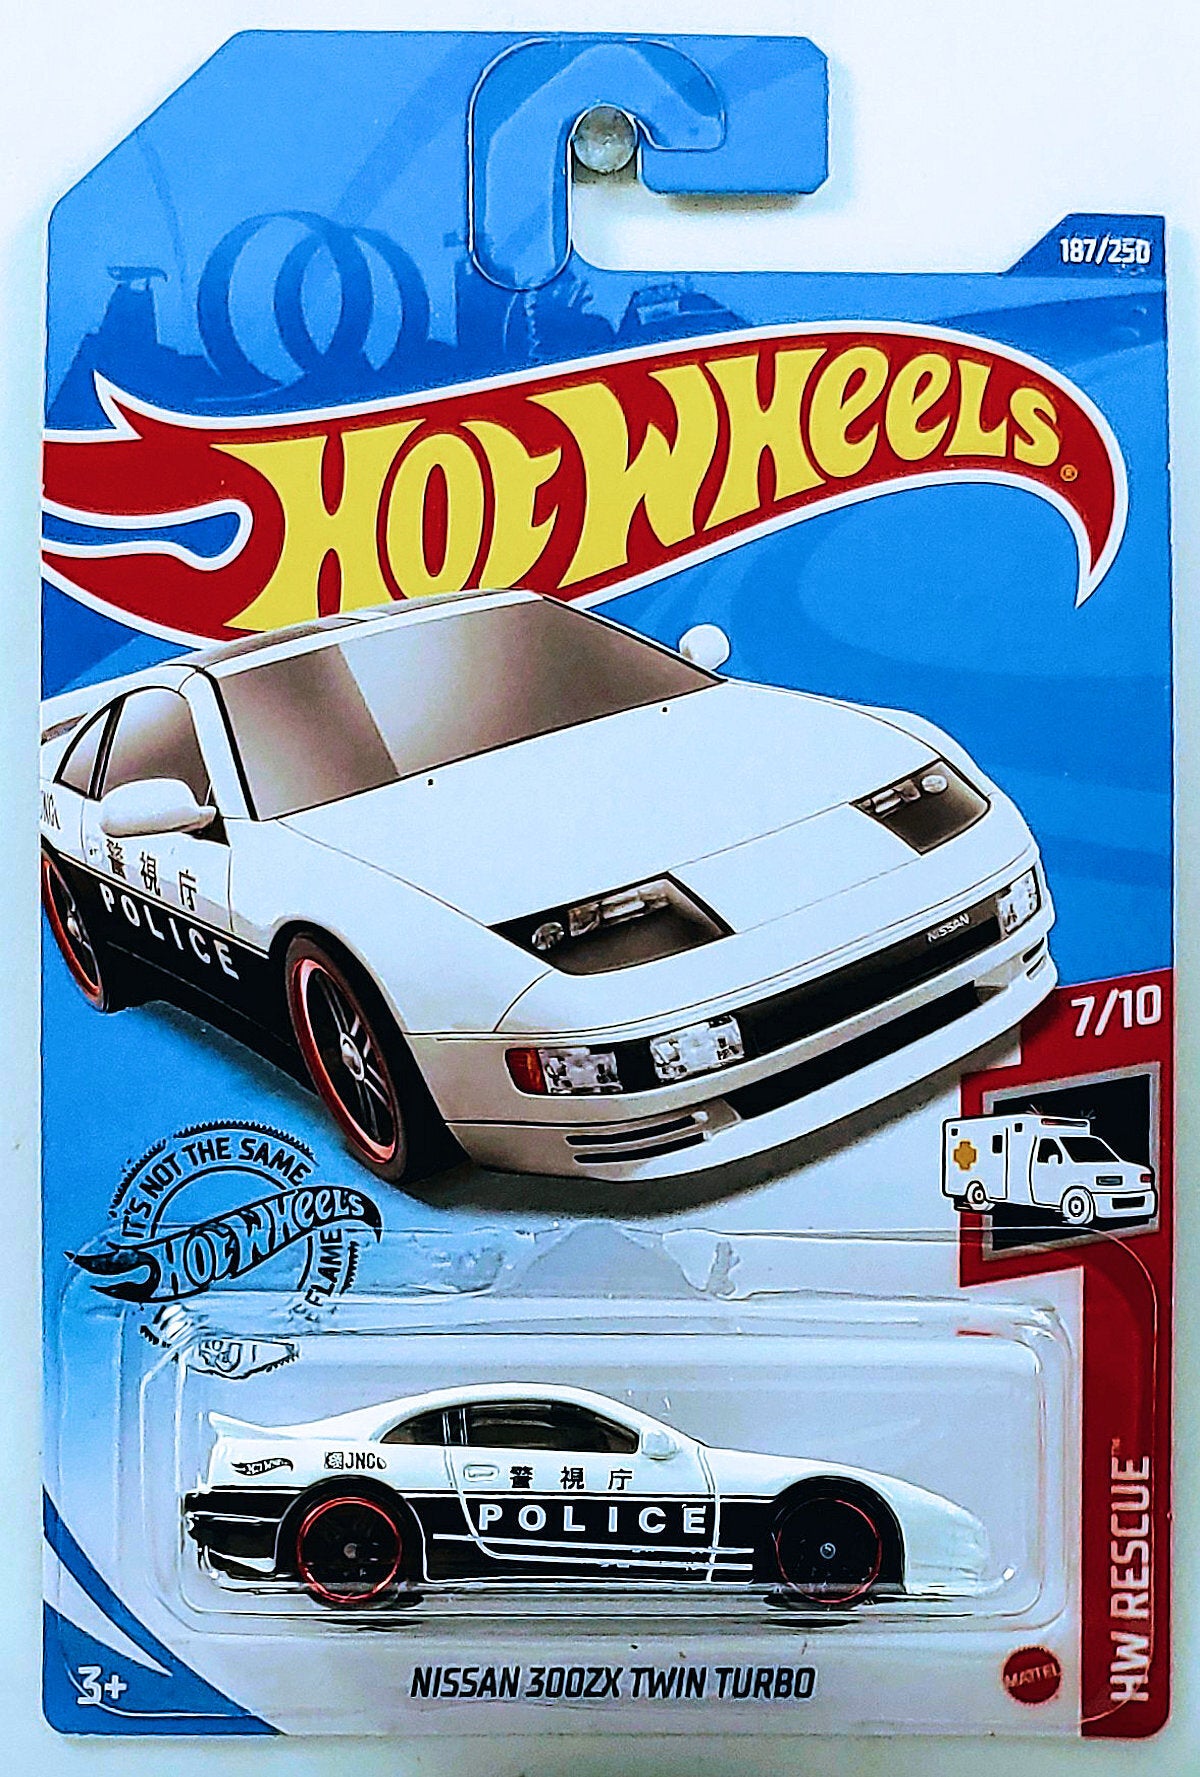 Hot Wheels 2020 - Collector # 187/250 - HW Rescue 7/10 - Nissan 300ZX Twin Turbo - White / Police - IC